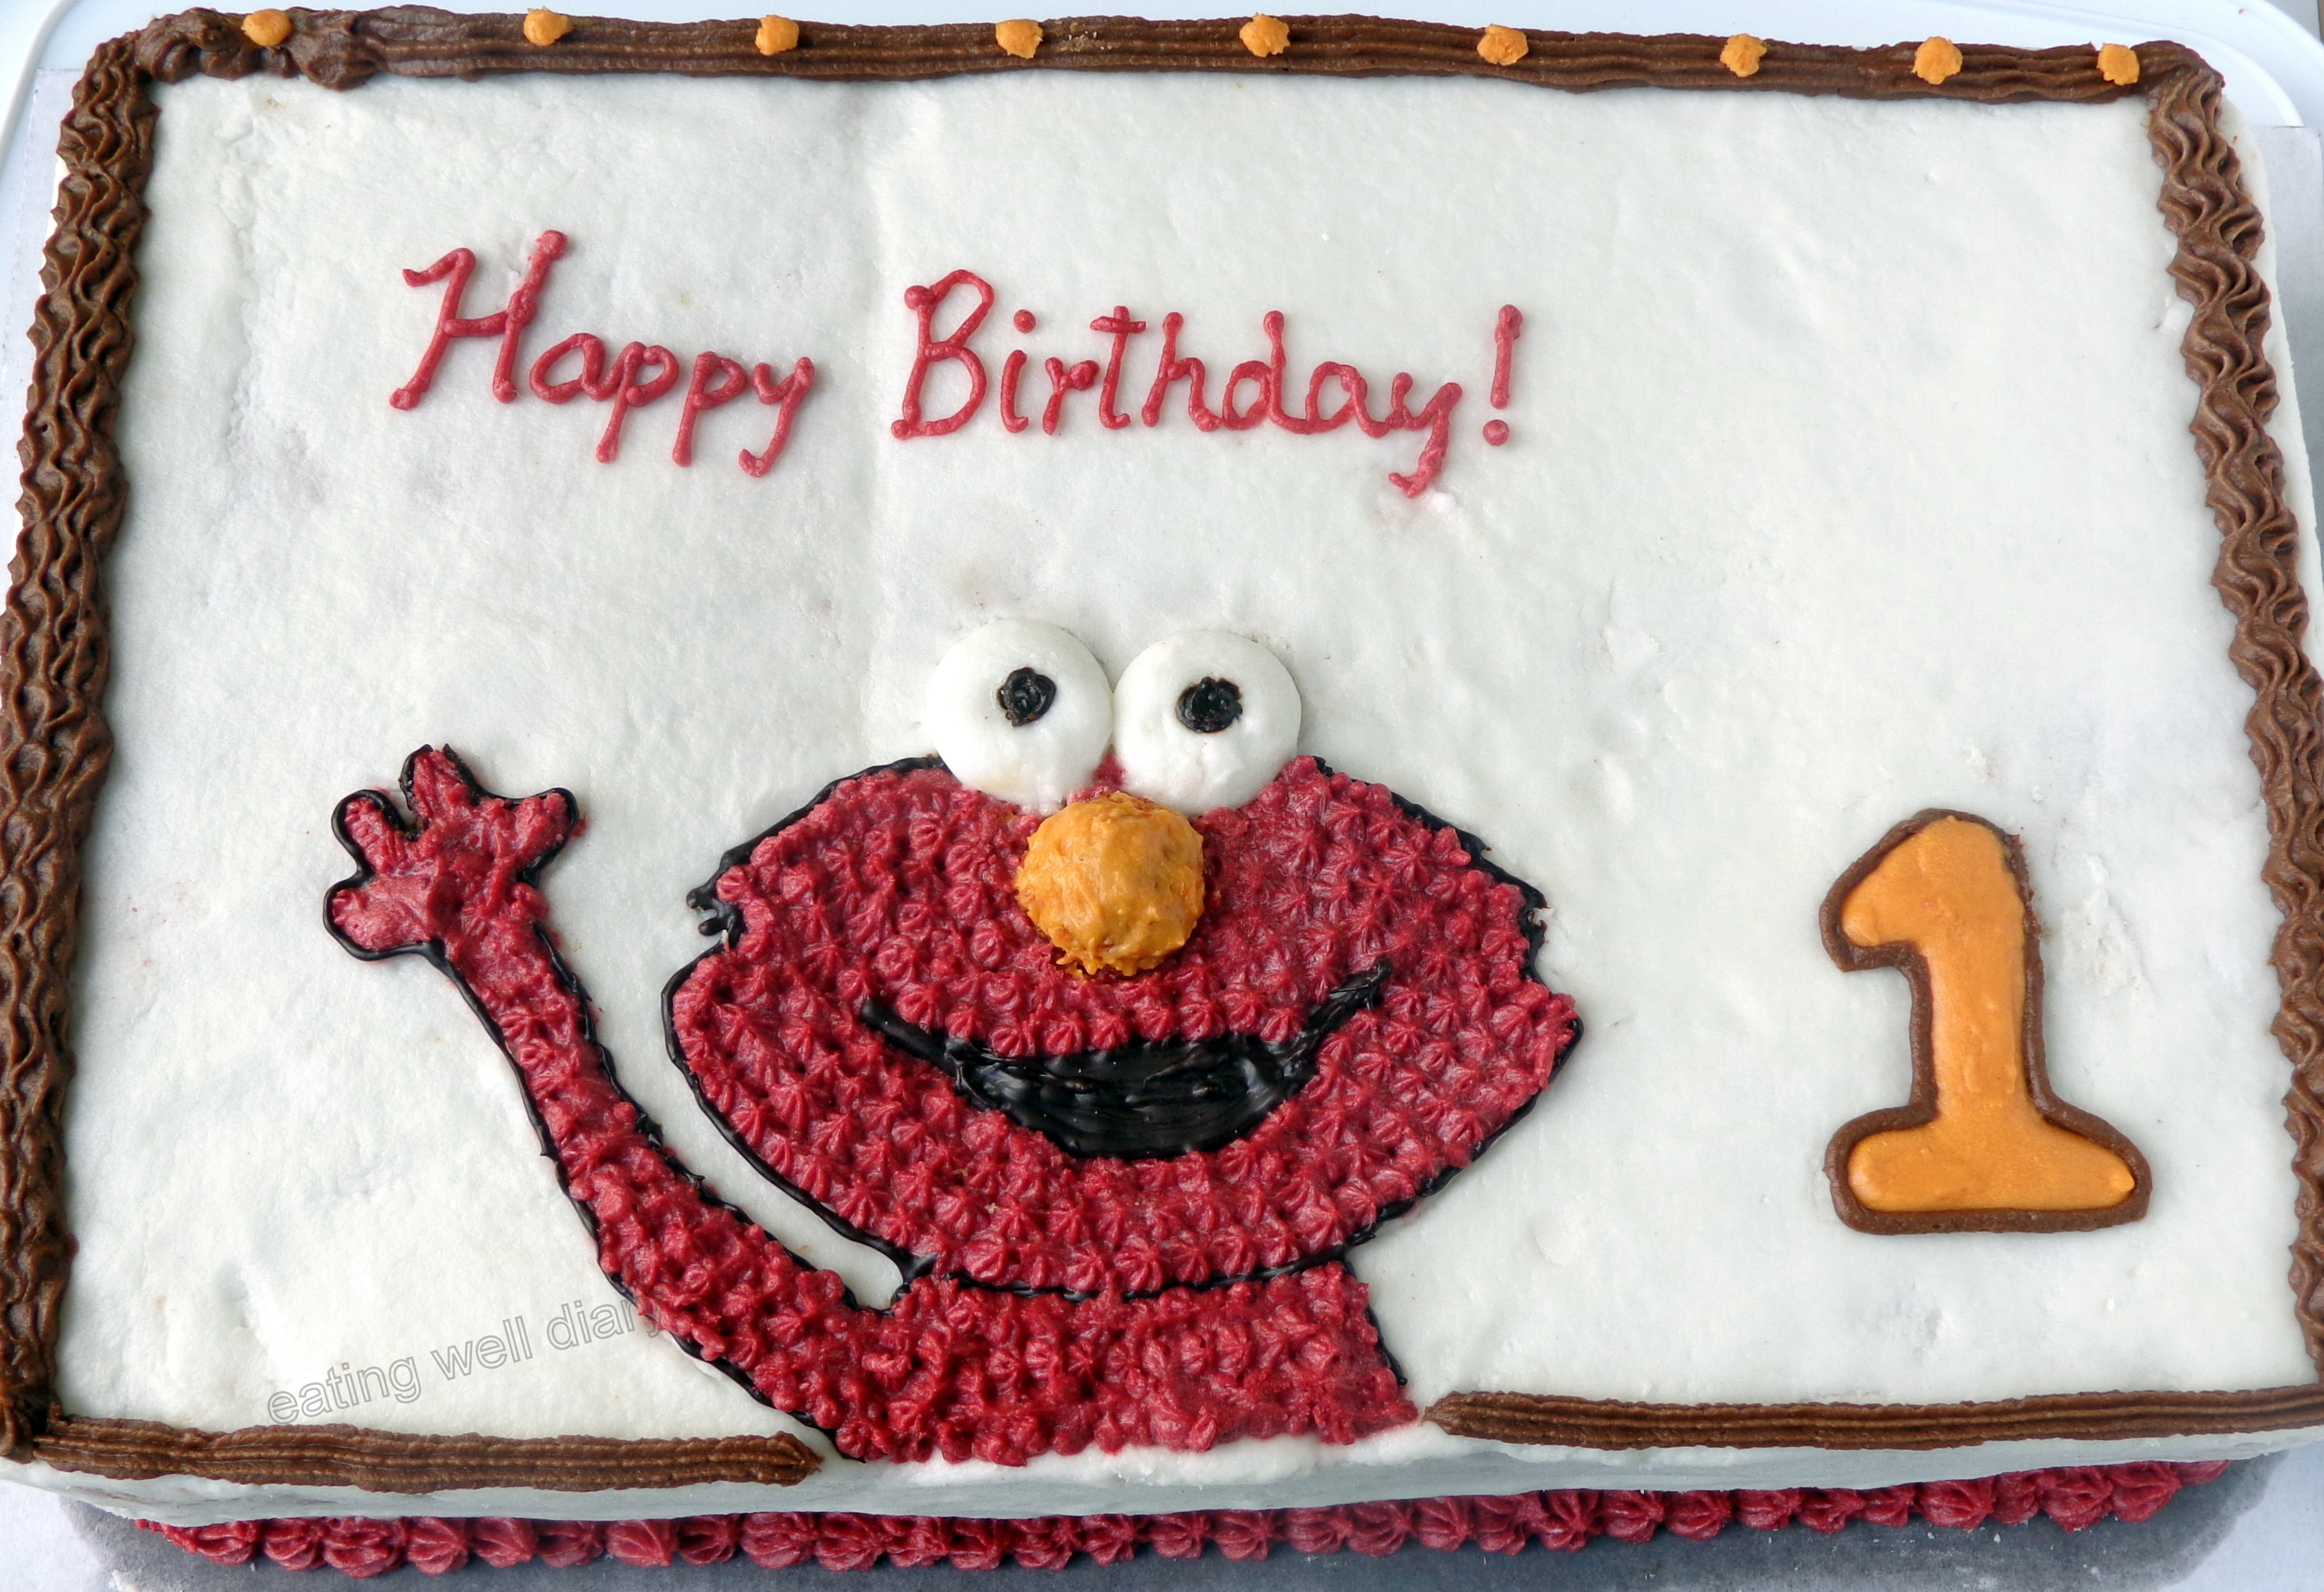 An Elmo themed vanilla birthday cake (whole wheat, eggless, natural colors)